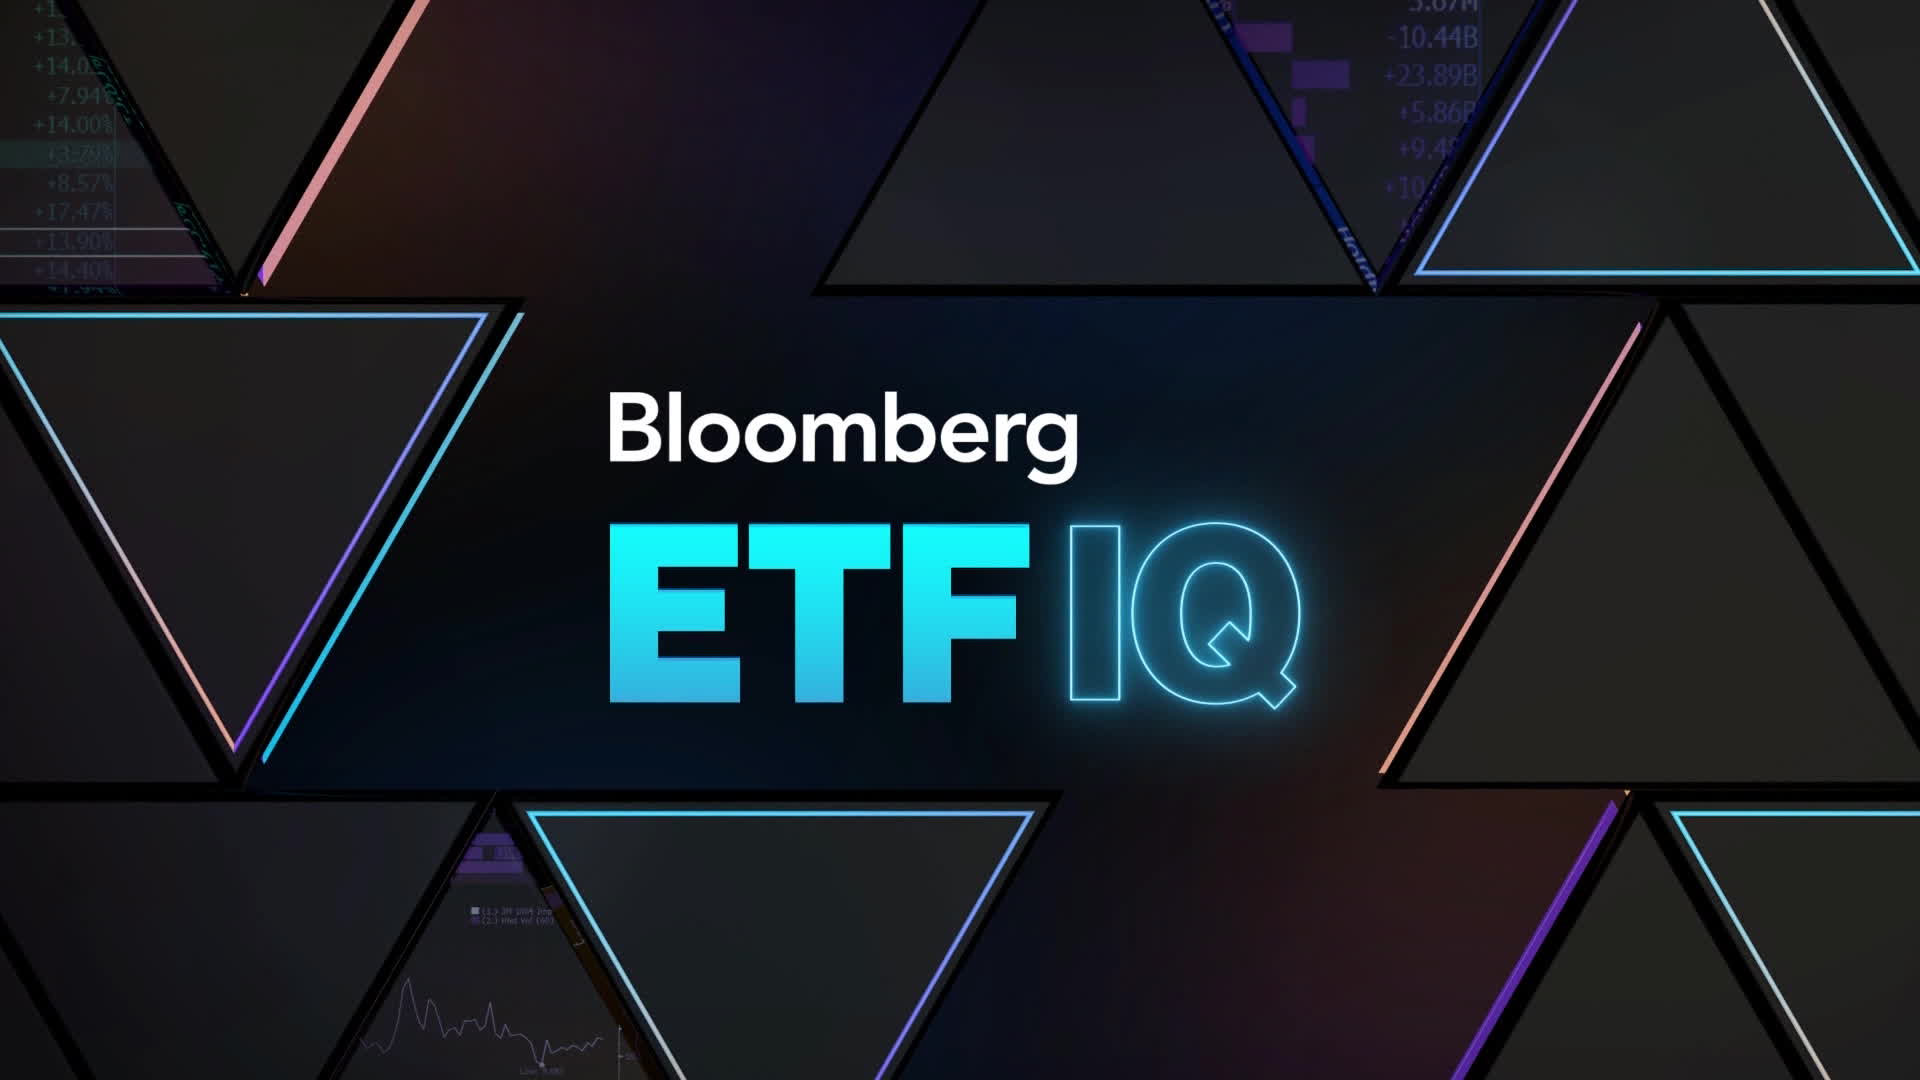 Andrew Tate Says His Brain Is 'Estimating' Approval Of Bitcoin ETF By SEC